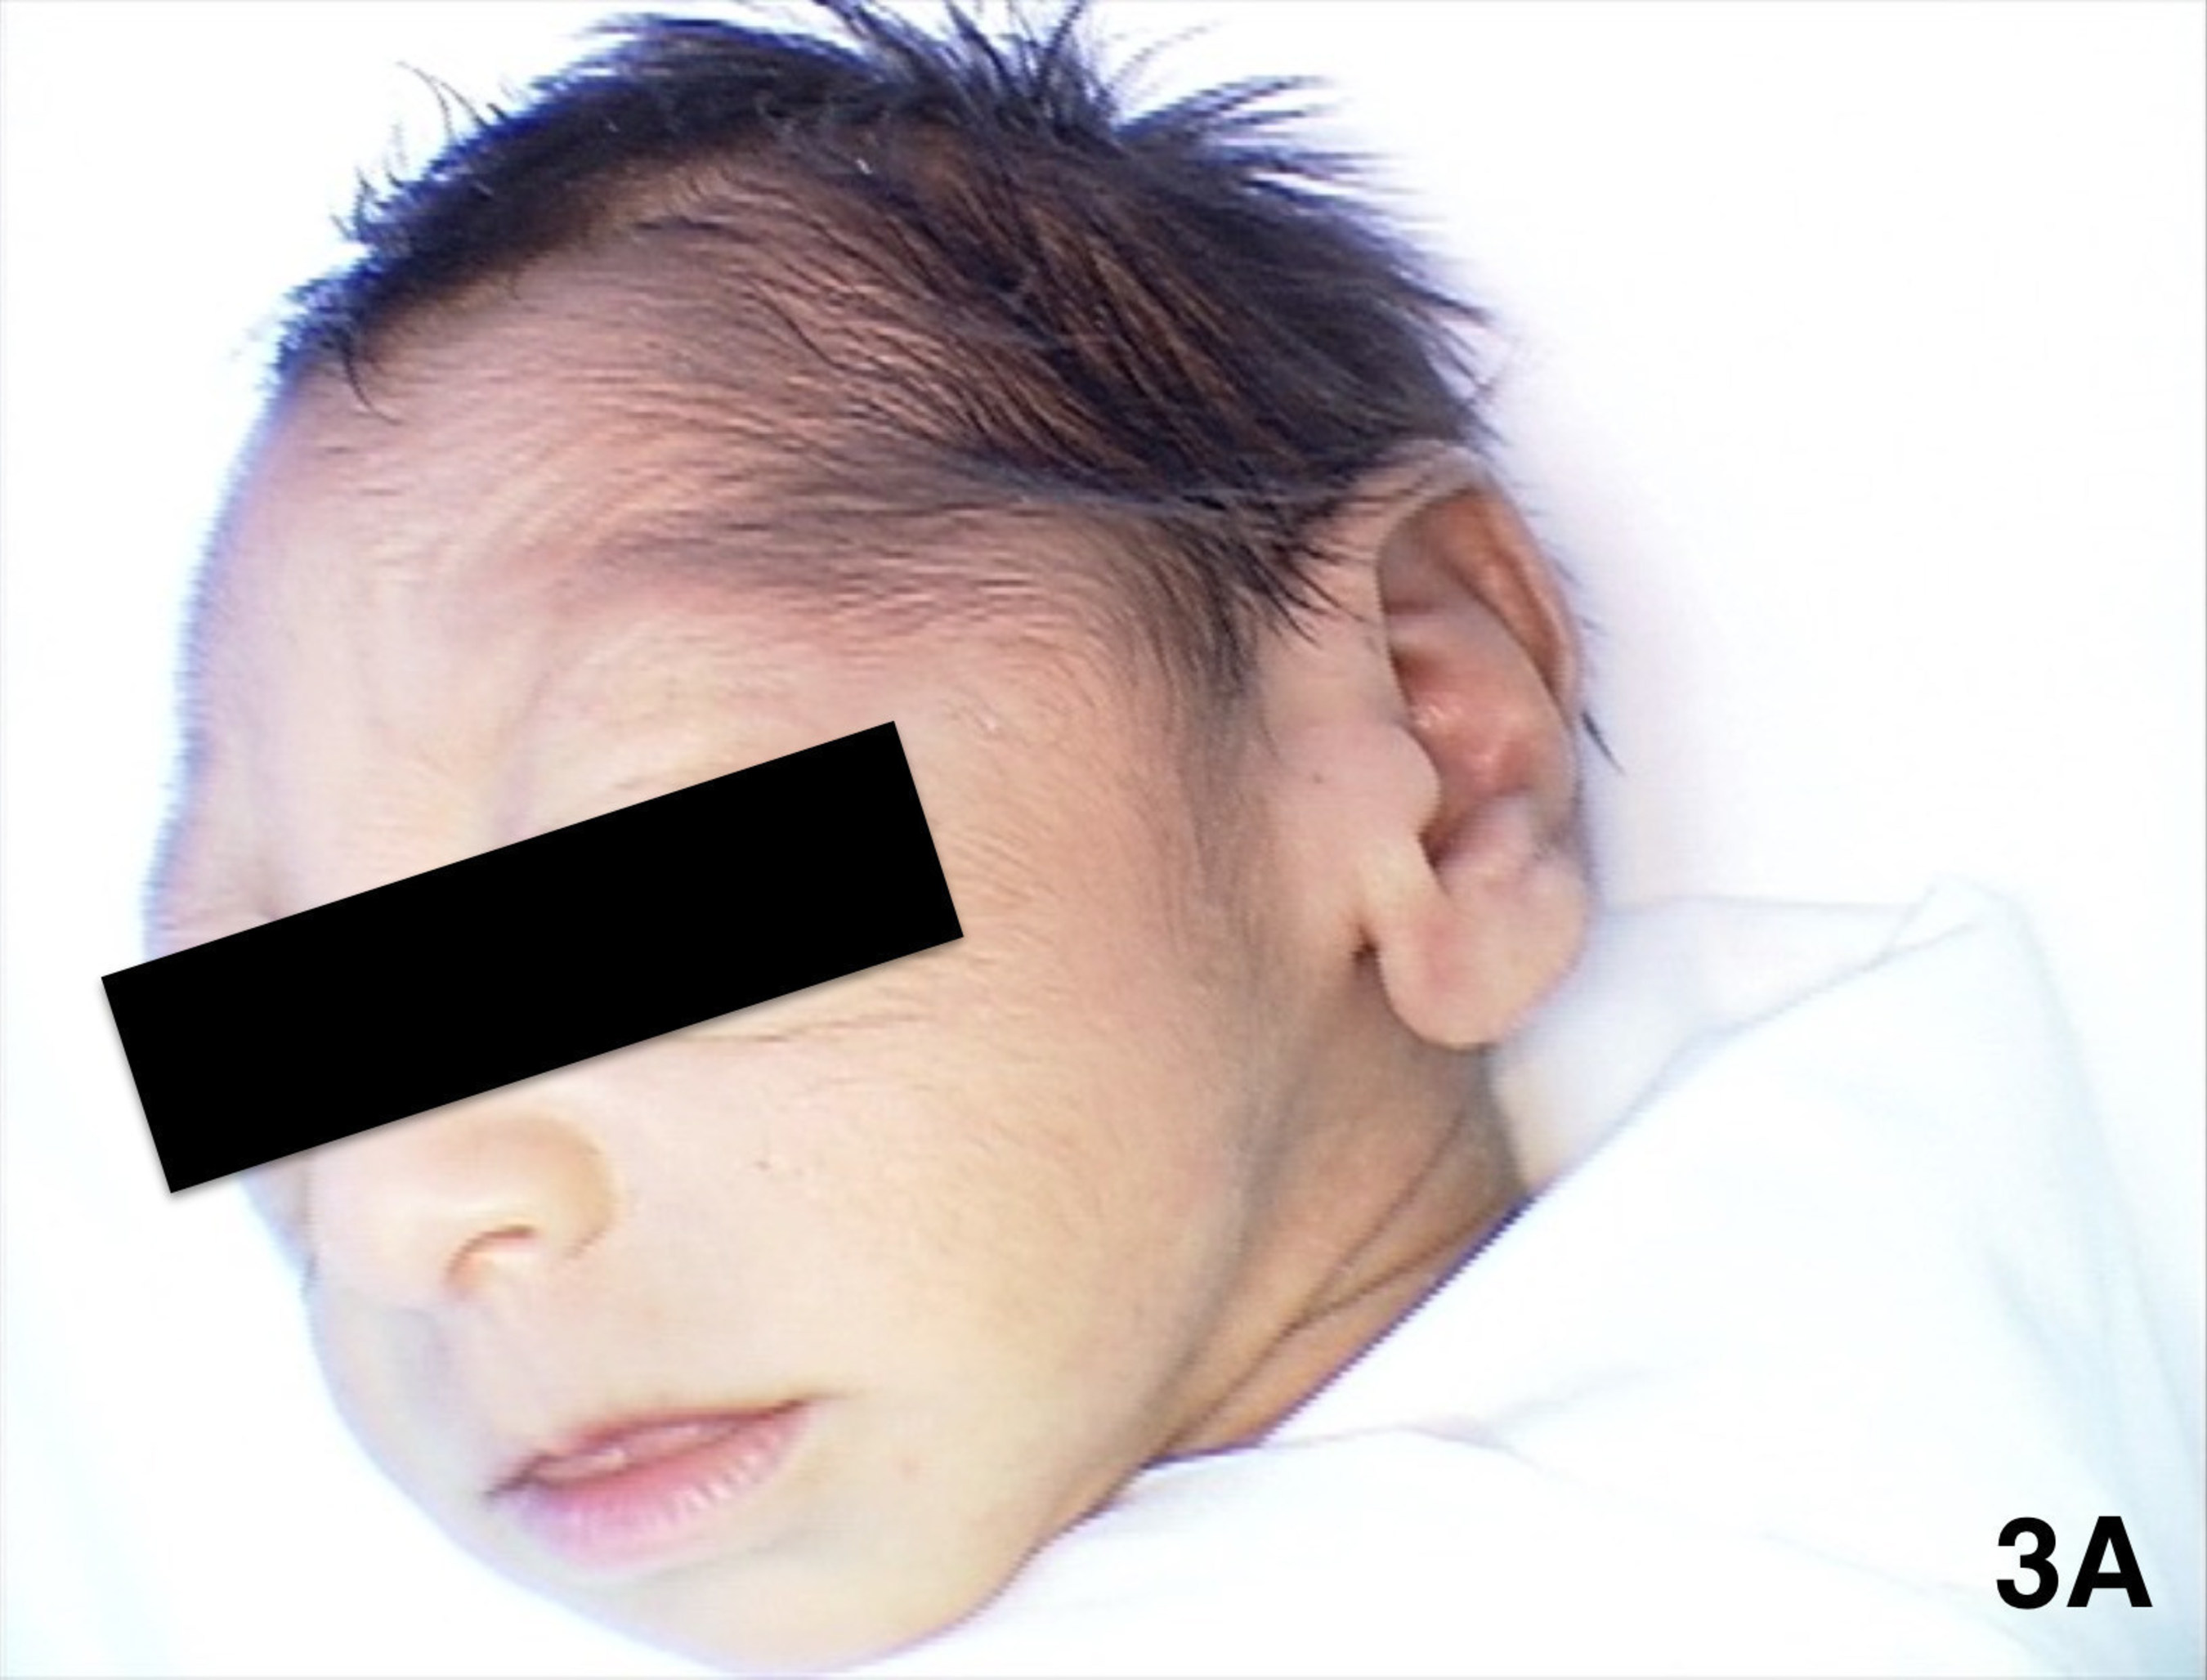 This infant has microcephaly presumed to be caused by the Zika virus. Researchers from Brazil and Stanford University recently found additional eye abnormalities in babies with Zika-induced microcephaly, according to a new study being published online May 25, 2016 in the journal Ophthalmology, journal of the American Academy of Ophthalmology.